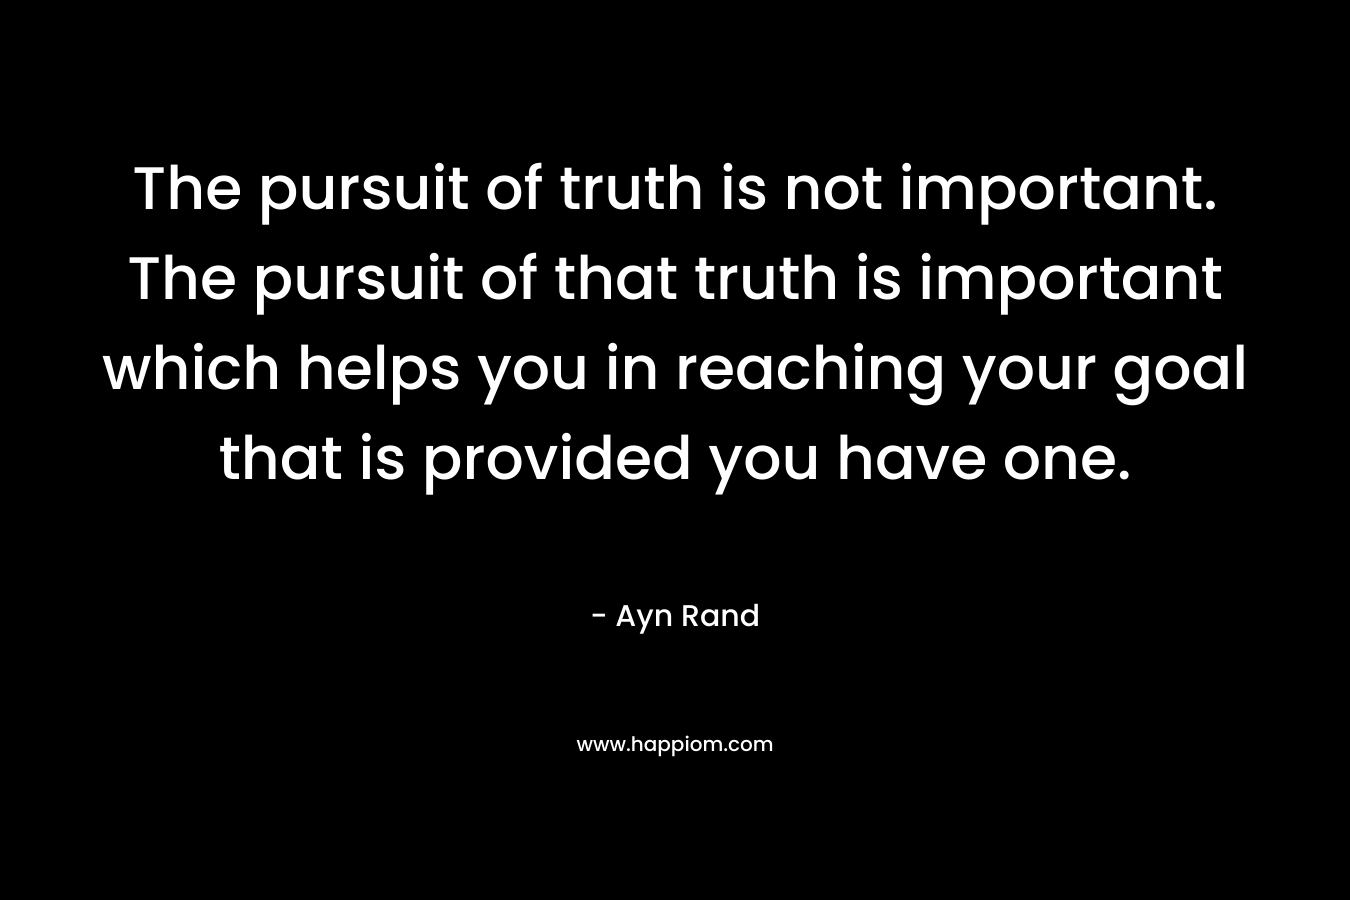 The pursuit of truth is not important. The pursuit of that truth is important which helps you in reaching your goal that is provided you have one. – Ayn Rand